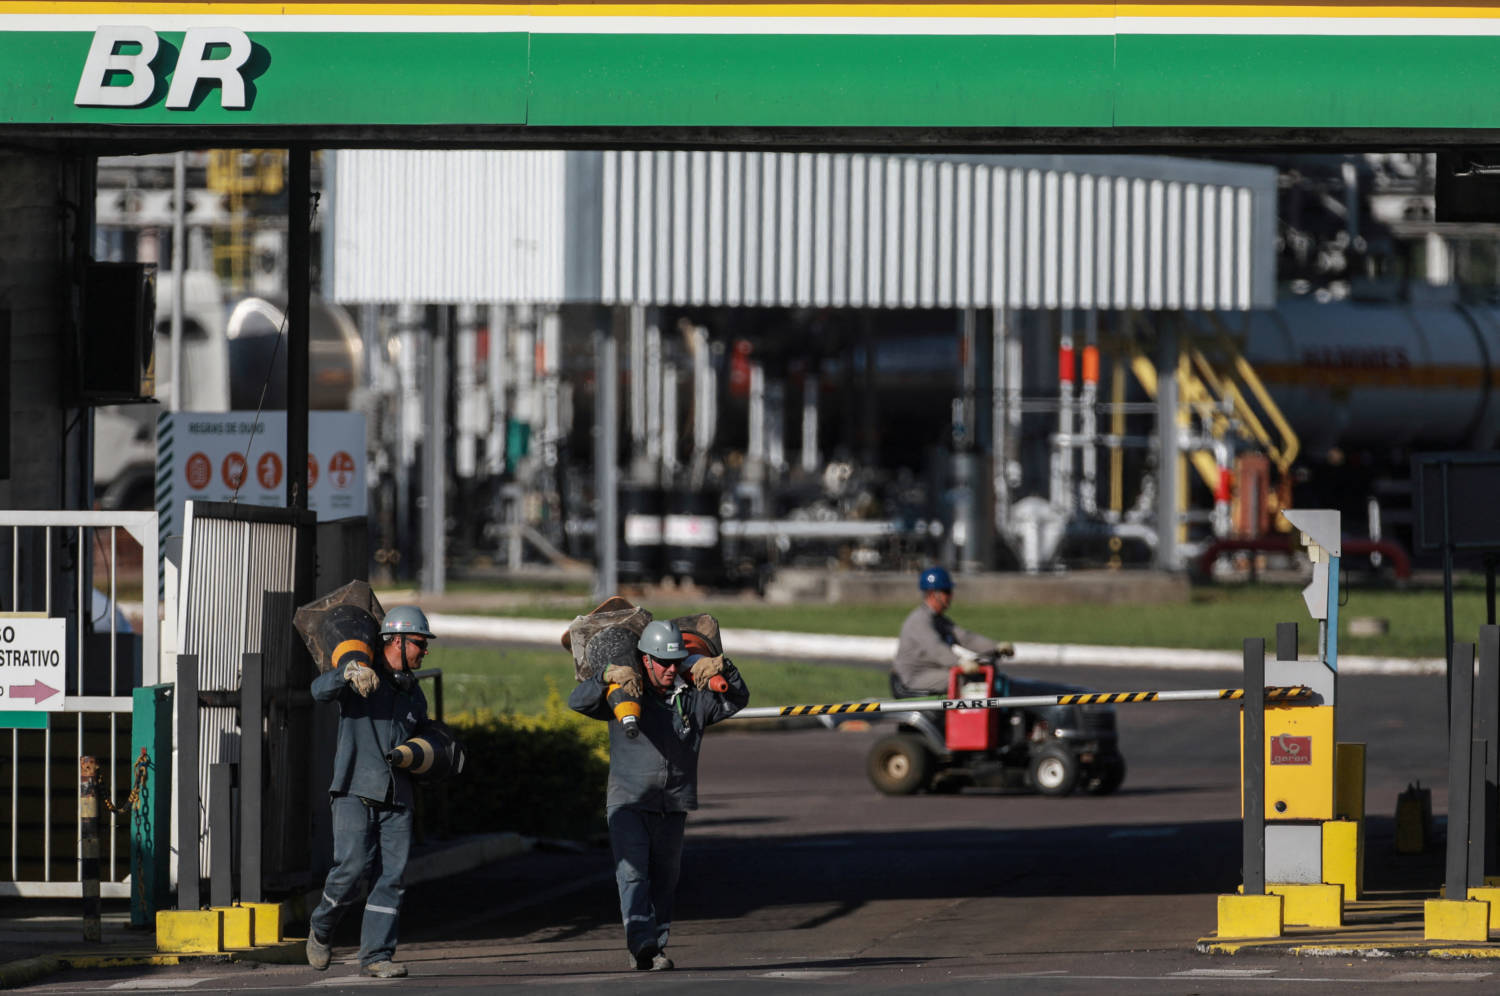 File Photo: Workers Walk In Front Of The Entrance Of The Petrobras Alberto Pasqualini Refinery In Canoas